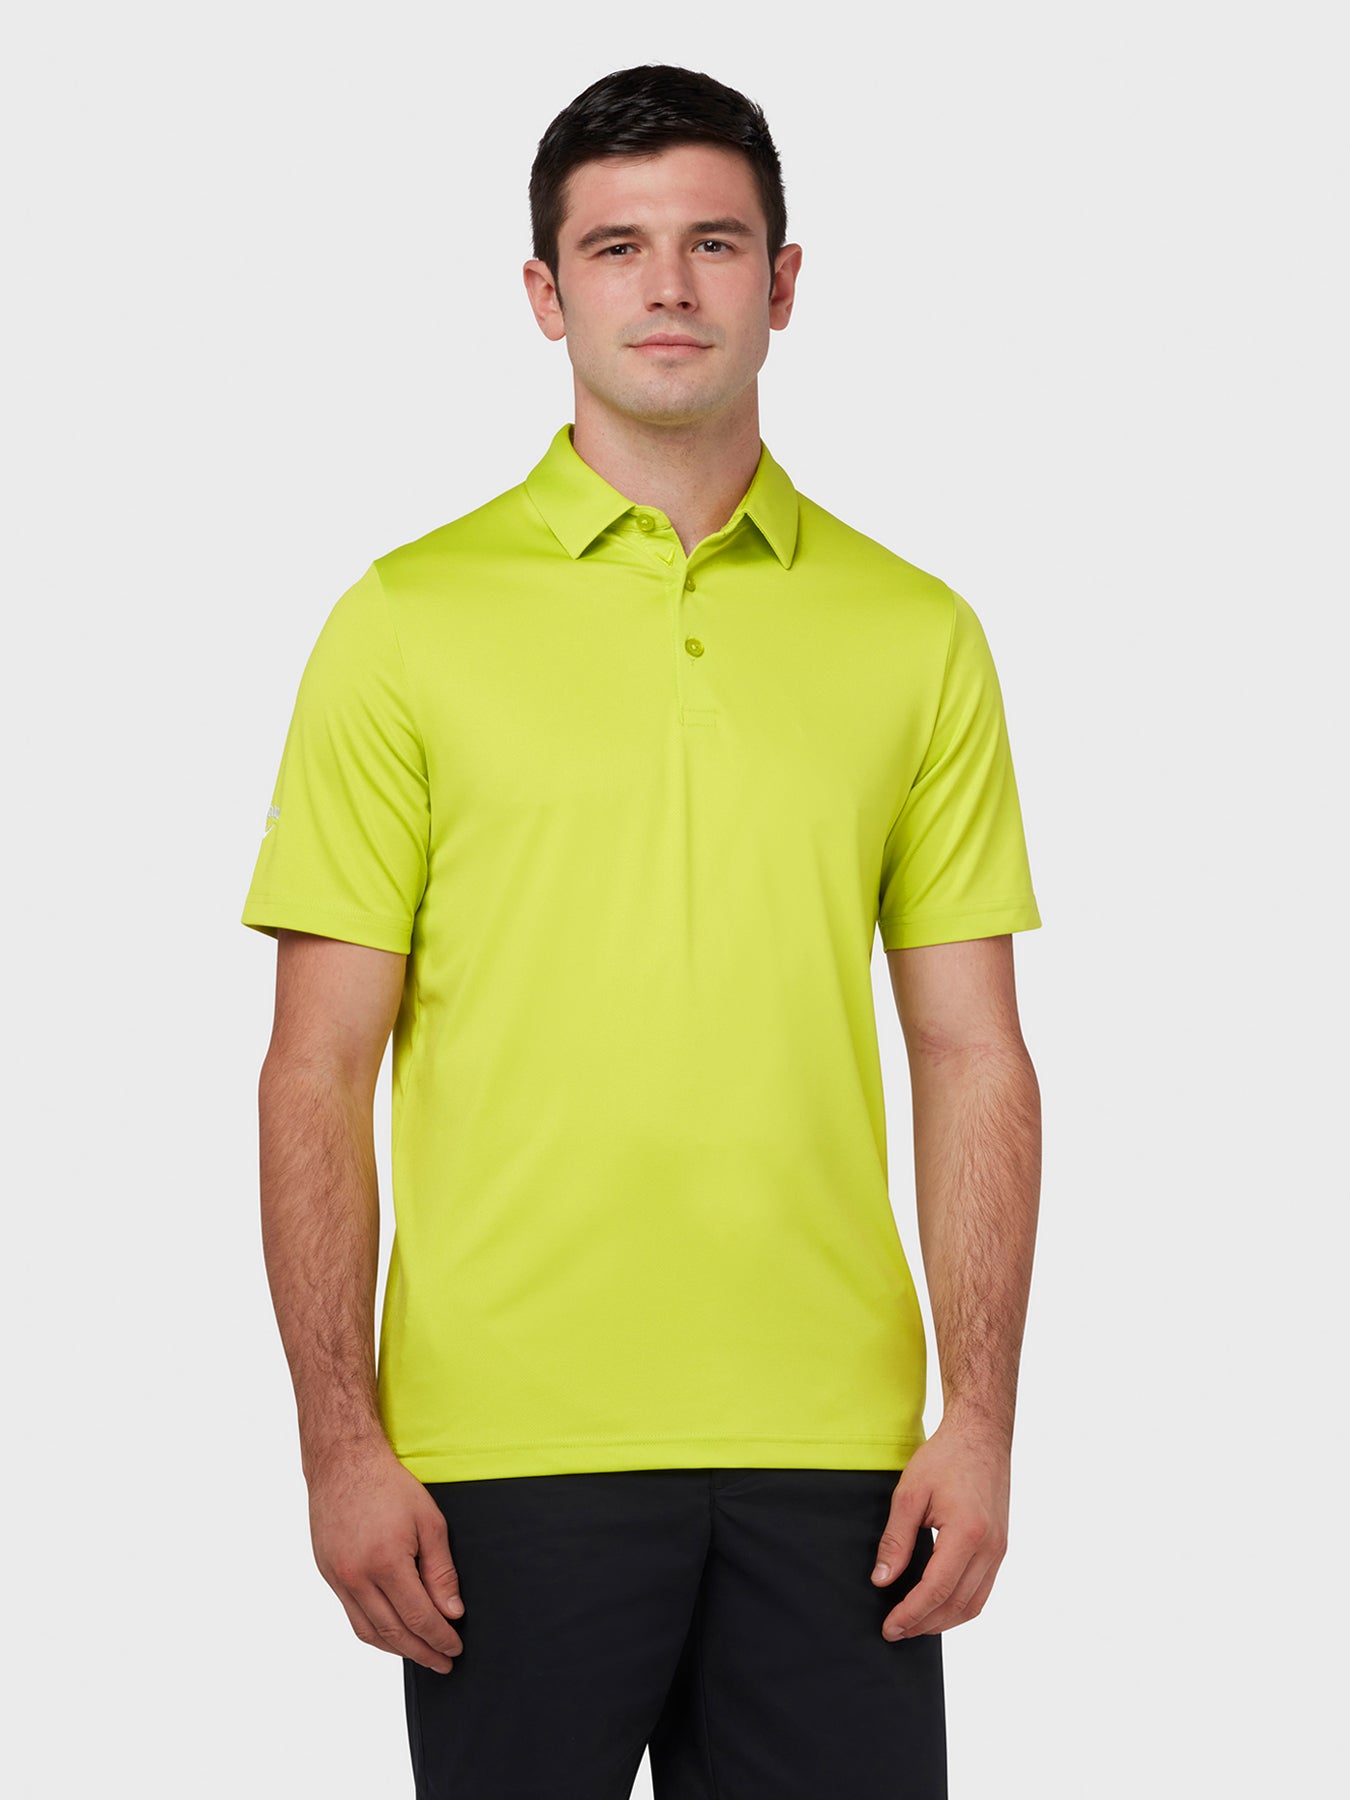 View Swing Tech Tour Polo In Surreal Green Surreal Green L information